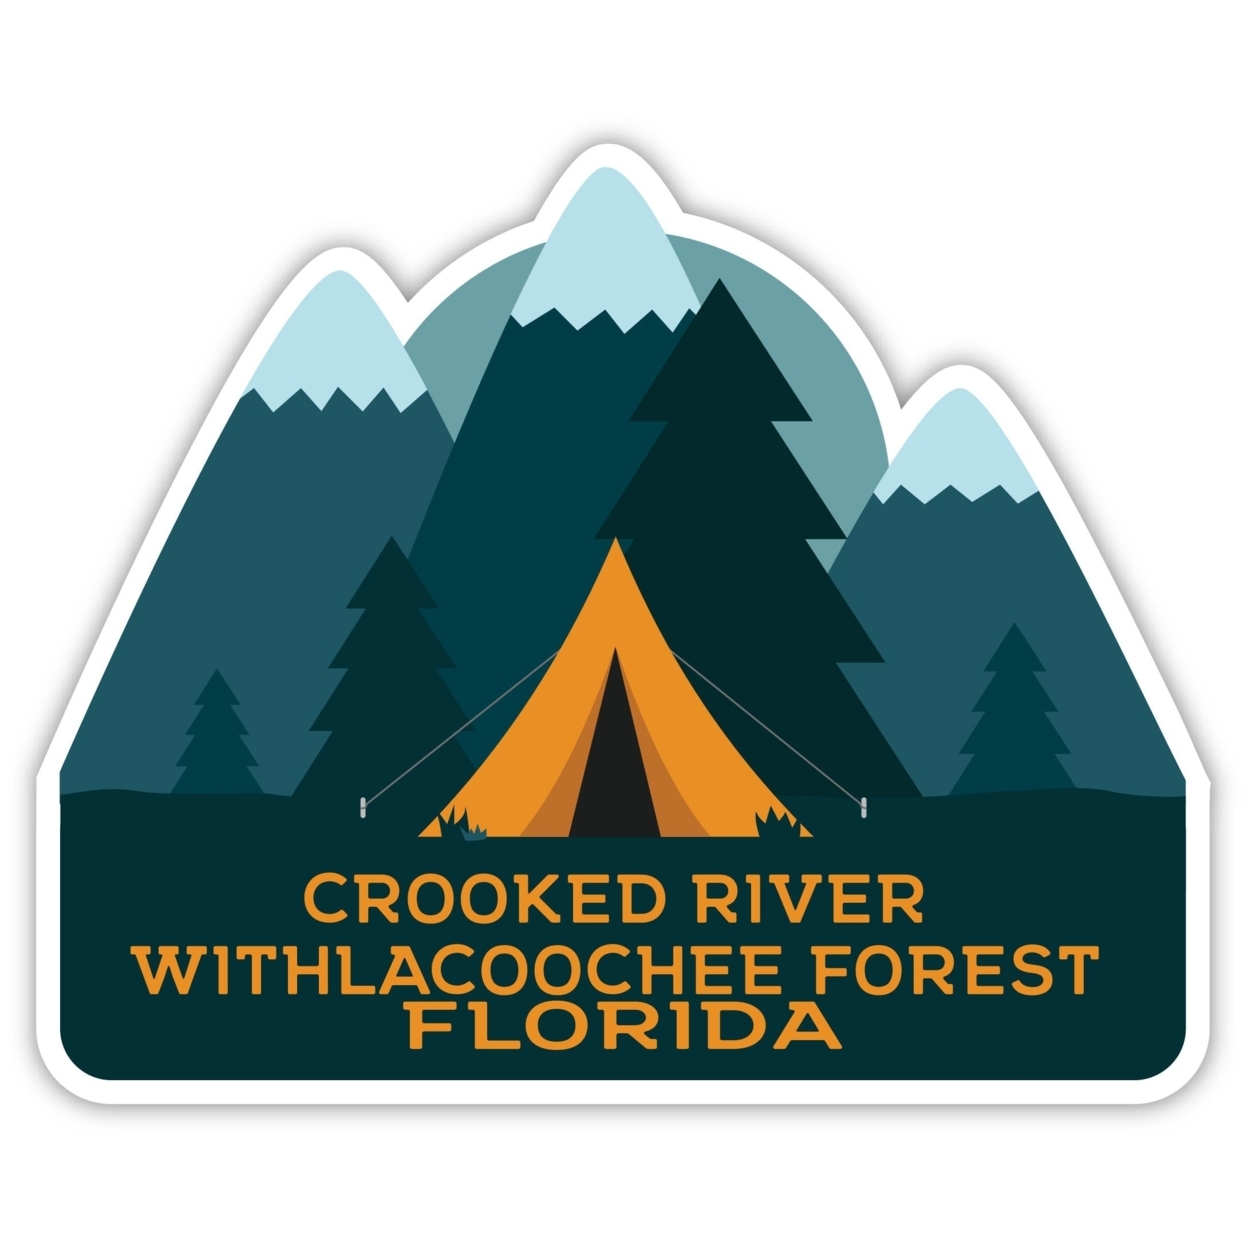 Crooked River Withlacoochee Forest Florida Souvenir Decorative Stickers (Choose Theme And Size) - 4-Pack, 2-Inch, Tent